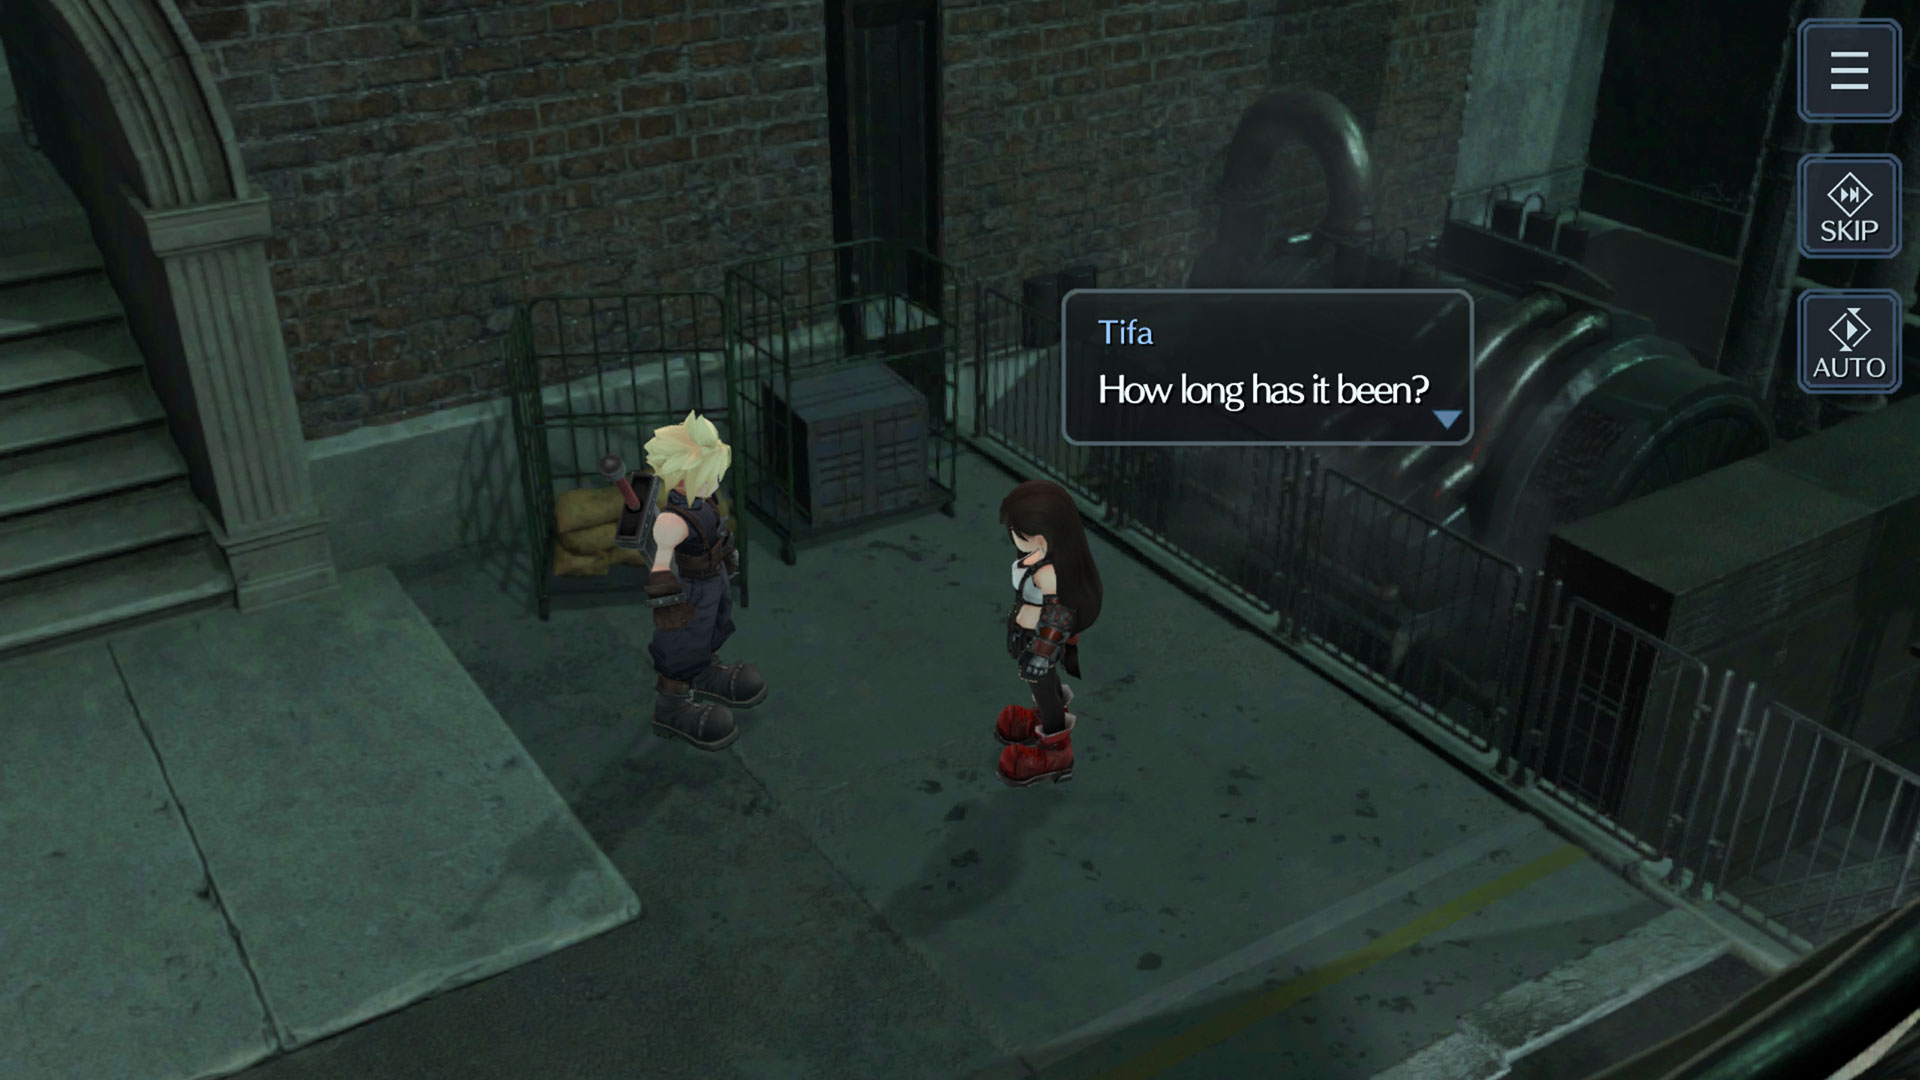 Final Fantasy VII Ever Crisis is a mobile game and it features content from the universe we've never seen before